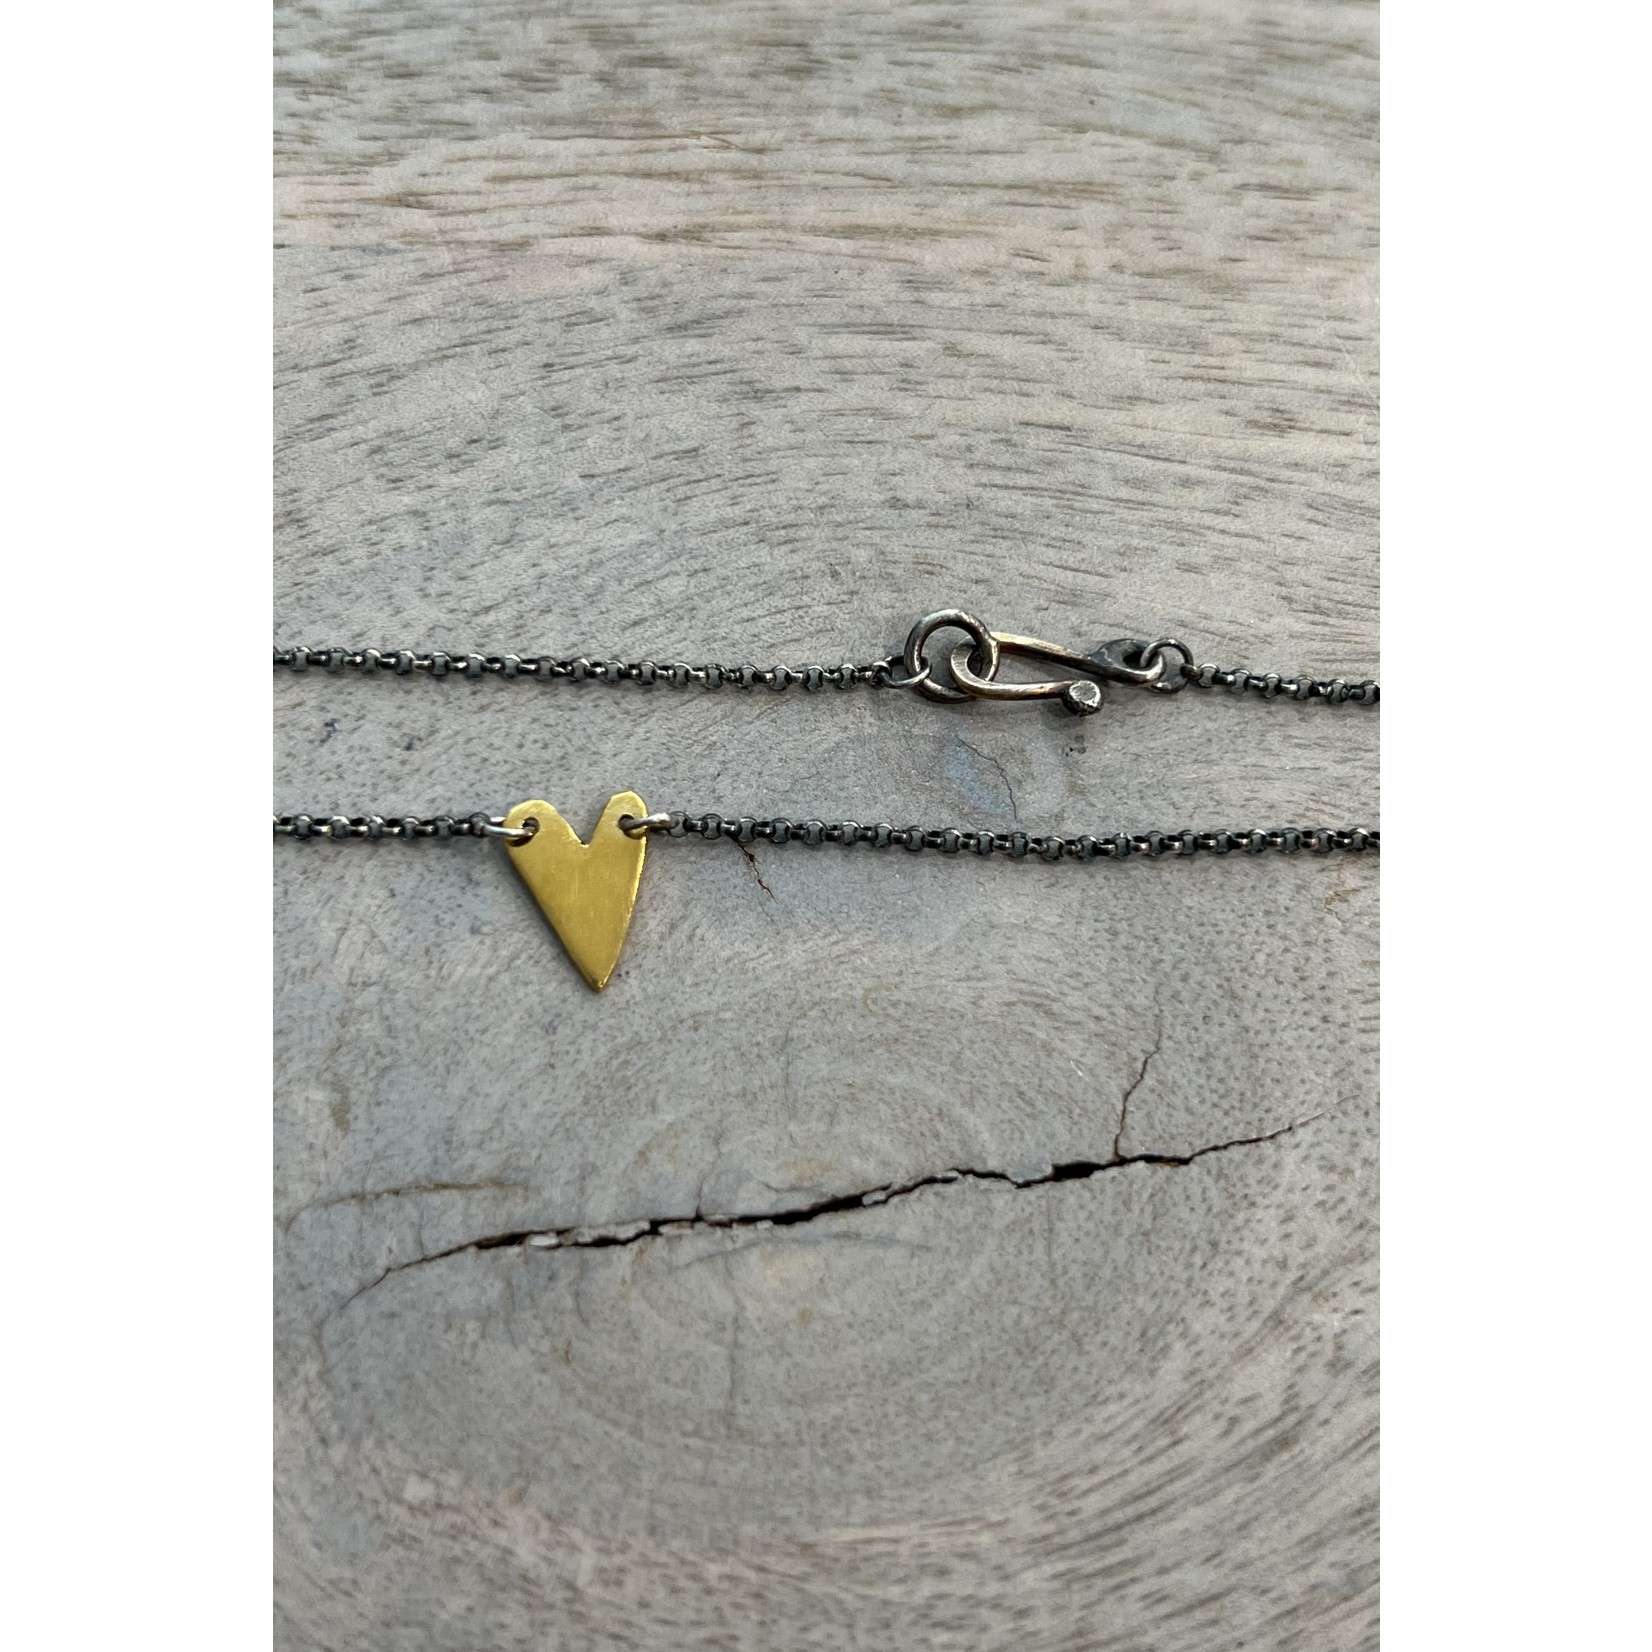 DeNev 18kt Gold Vermeil Heart Necklace on Oxidized SS Chain